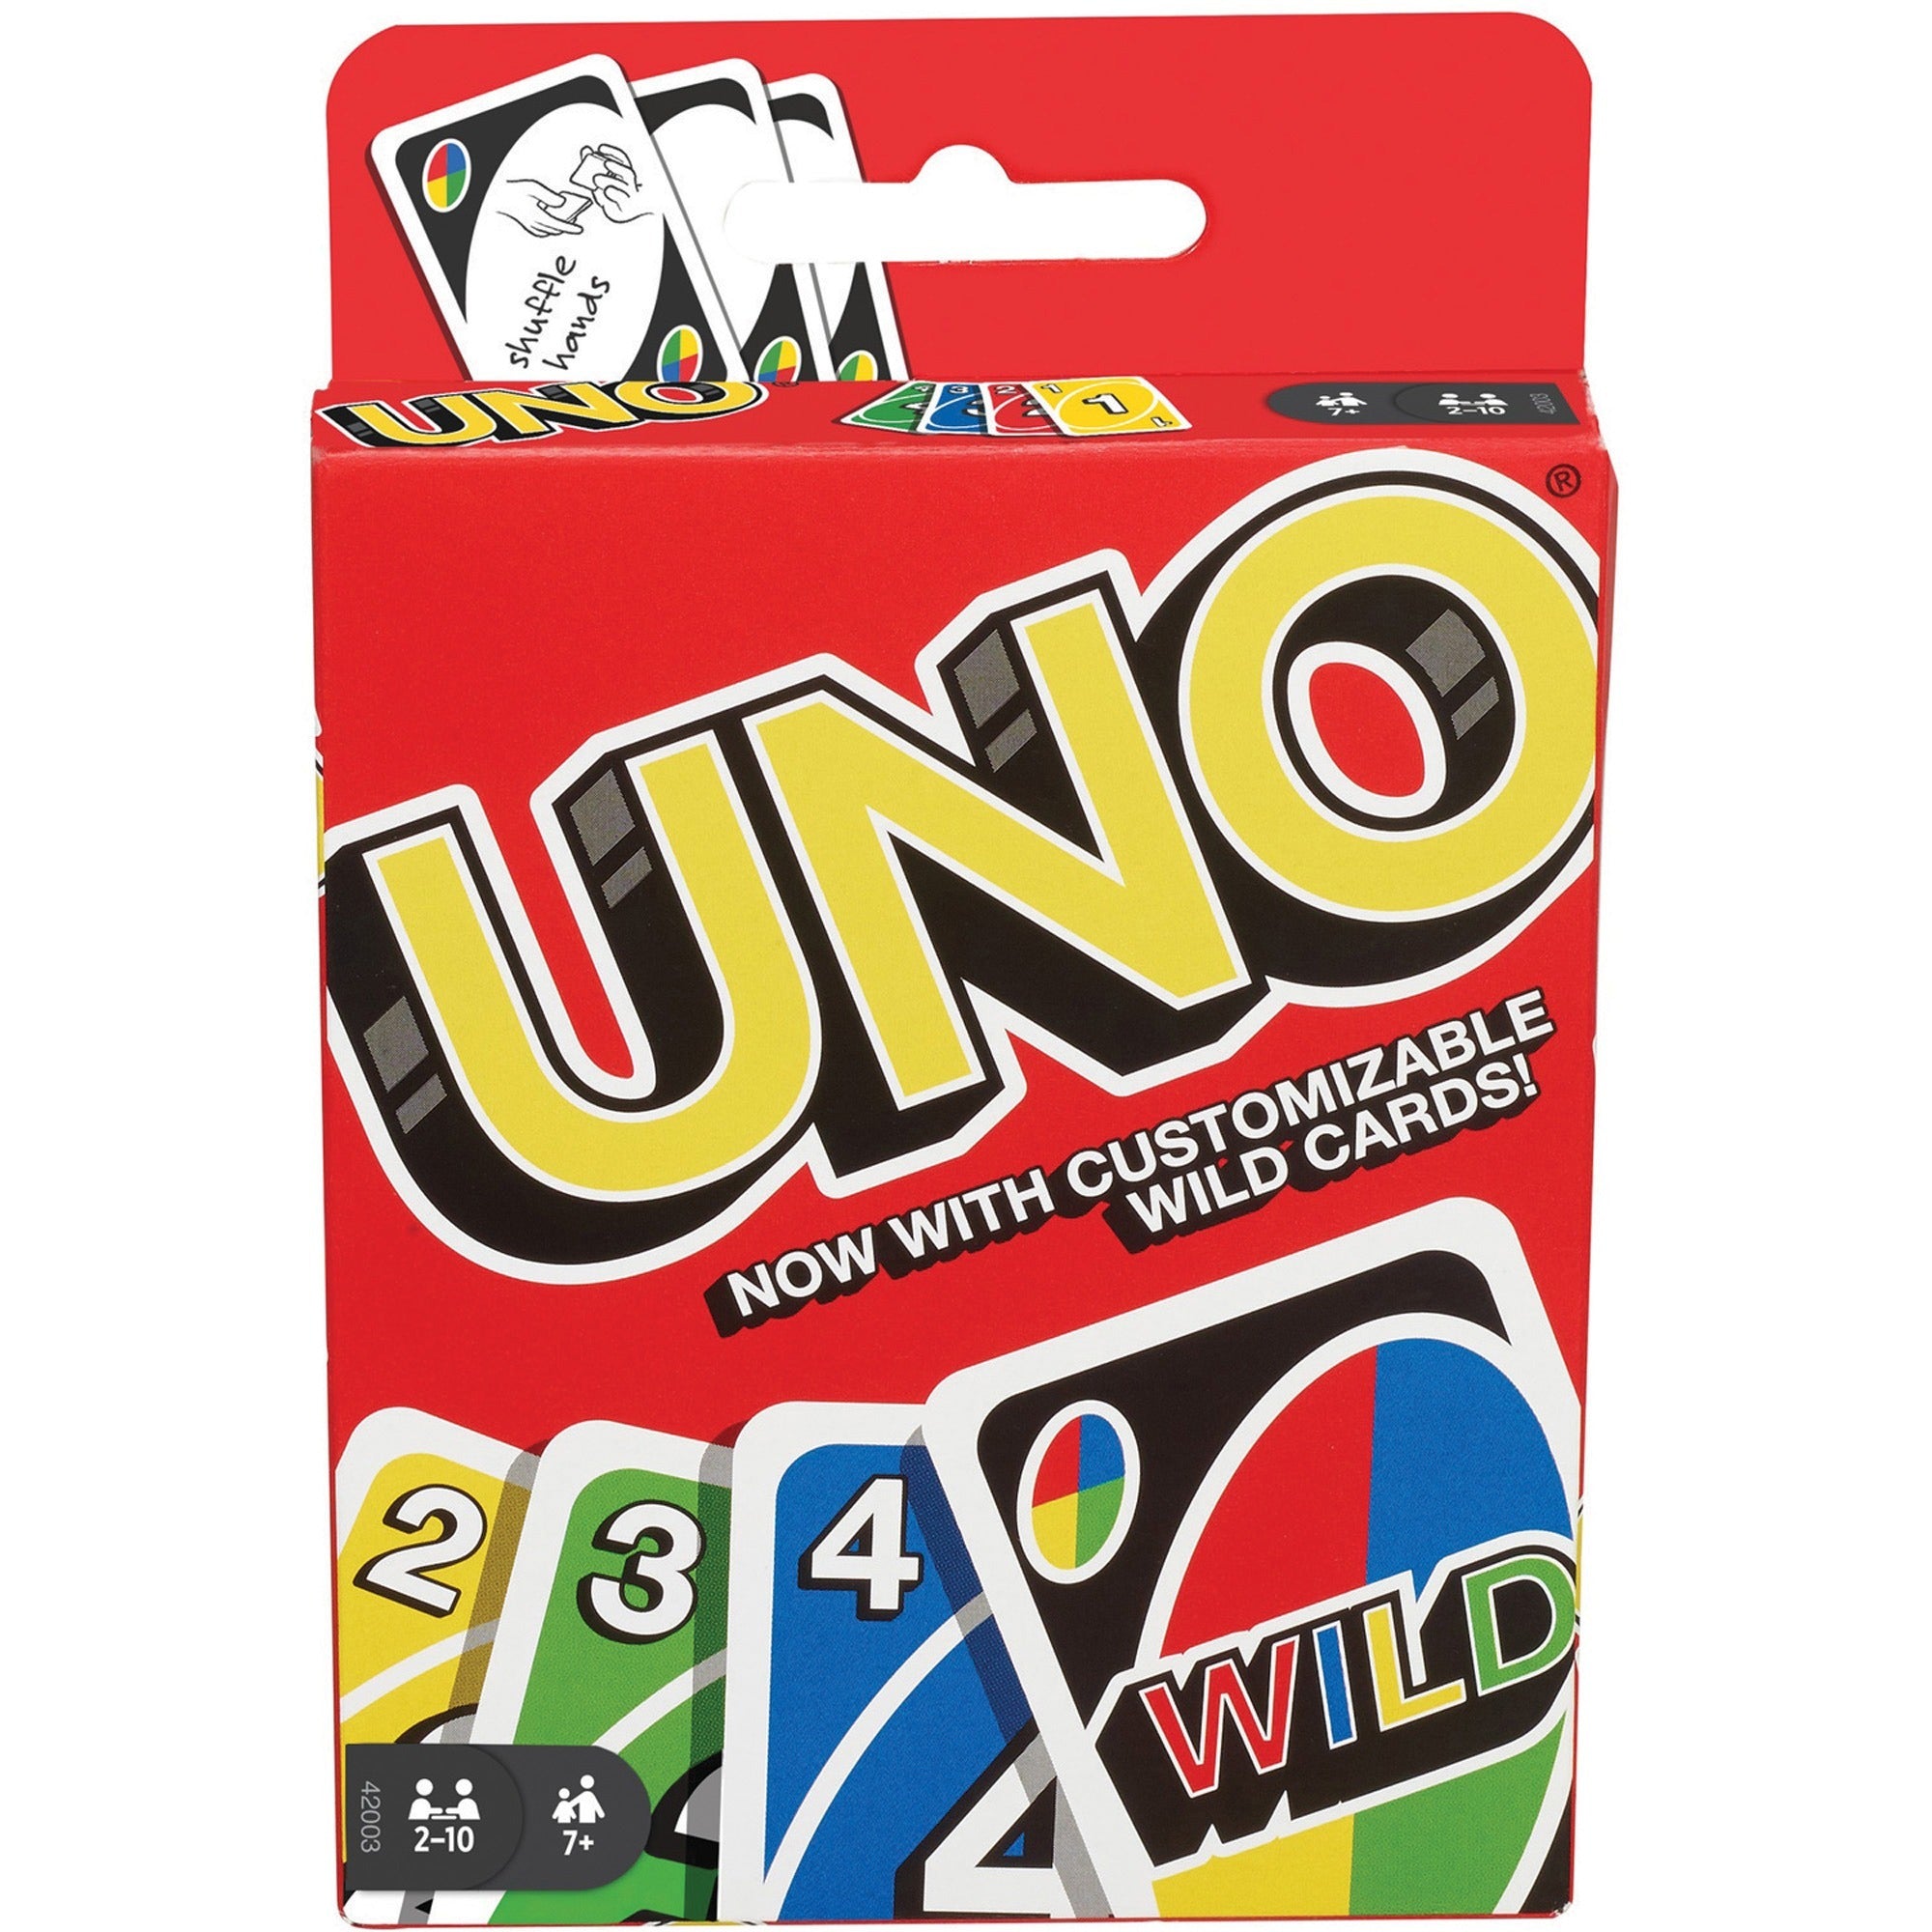 mattel-uno-card-game-classic-card-game-great-group-game-fast-fun-for-everyone!_mtt42003 - 1